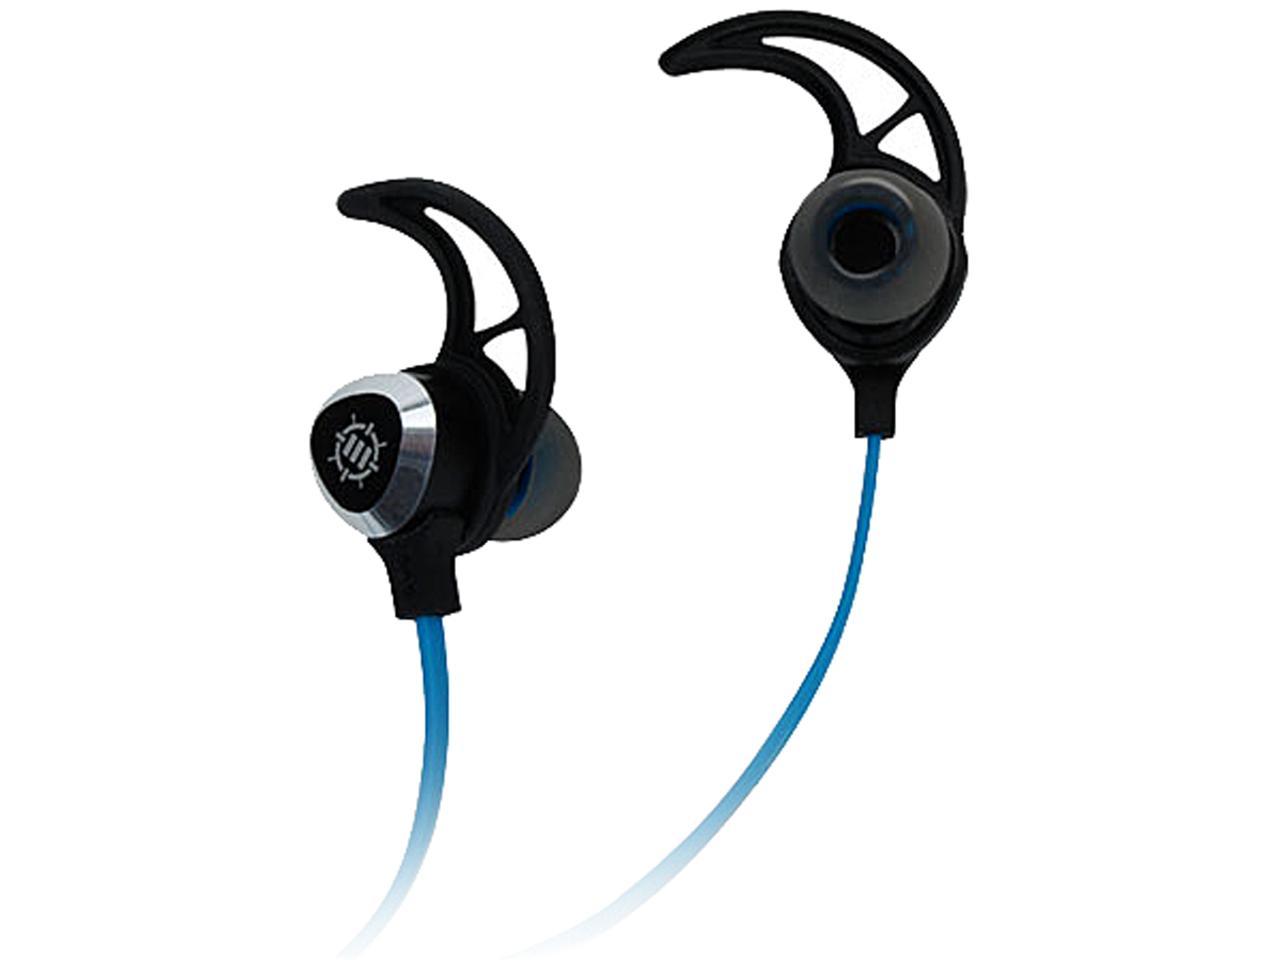 earbud headset for xbox one